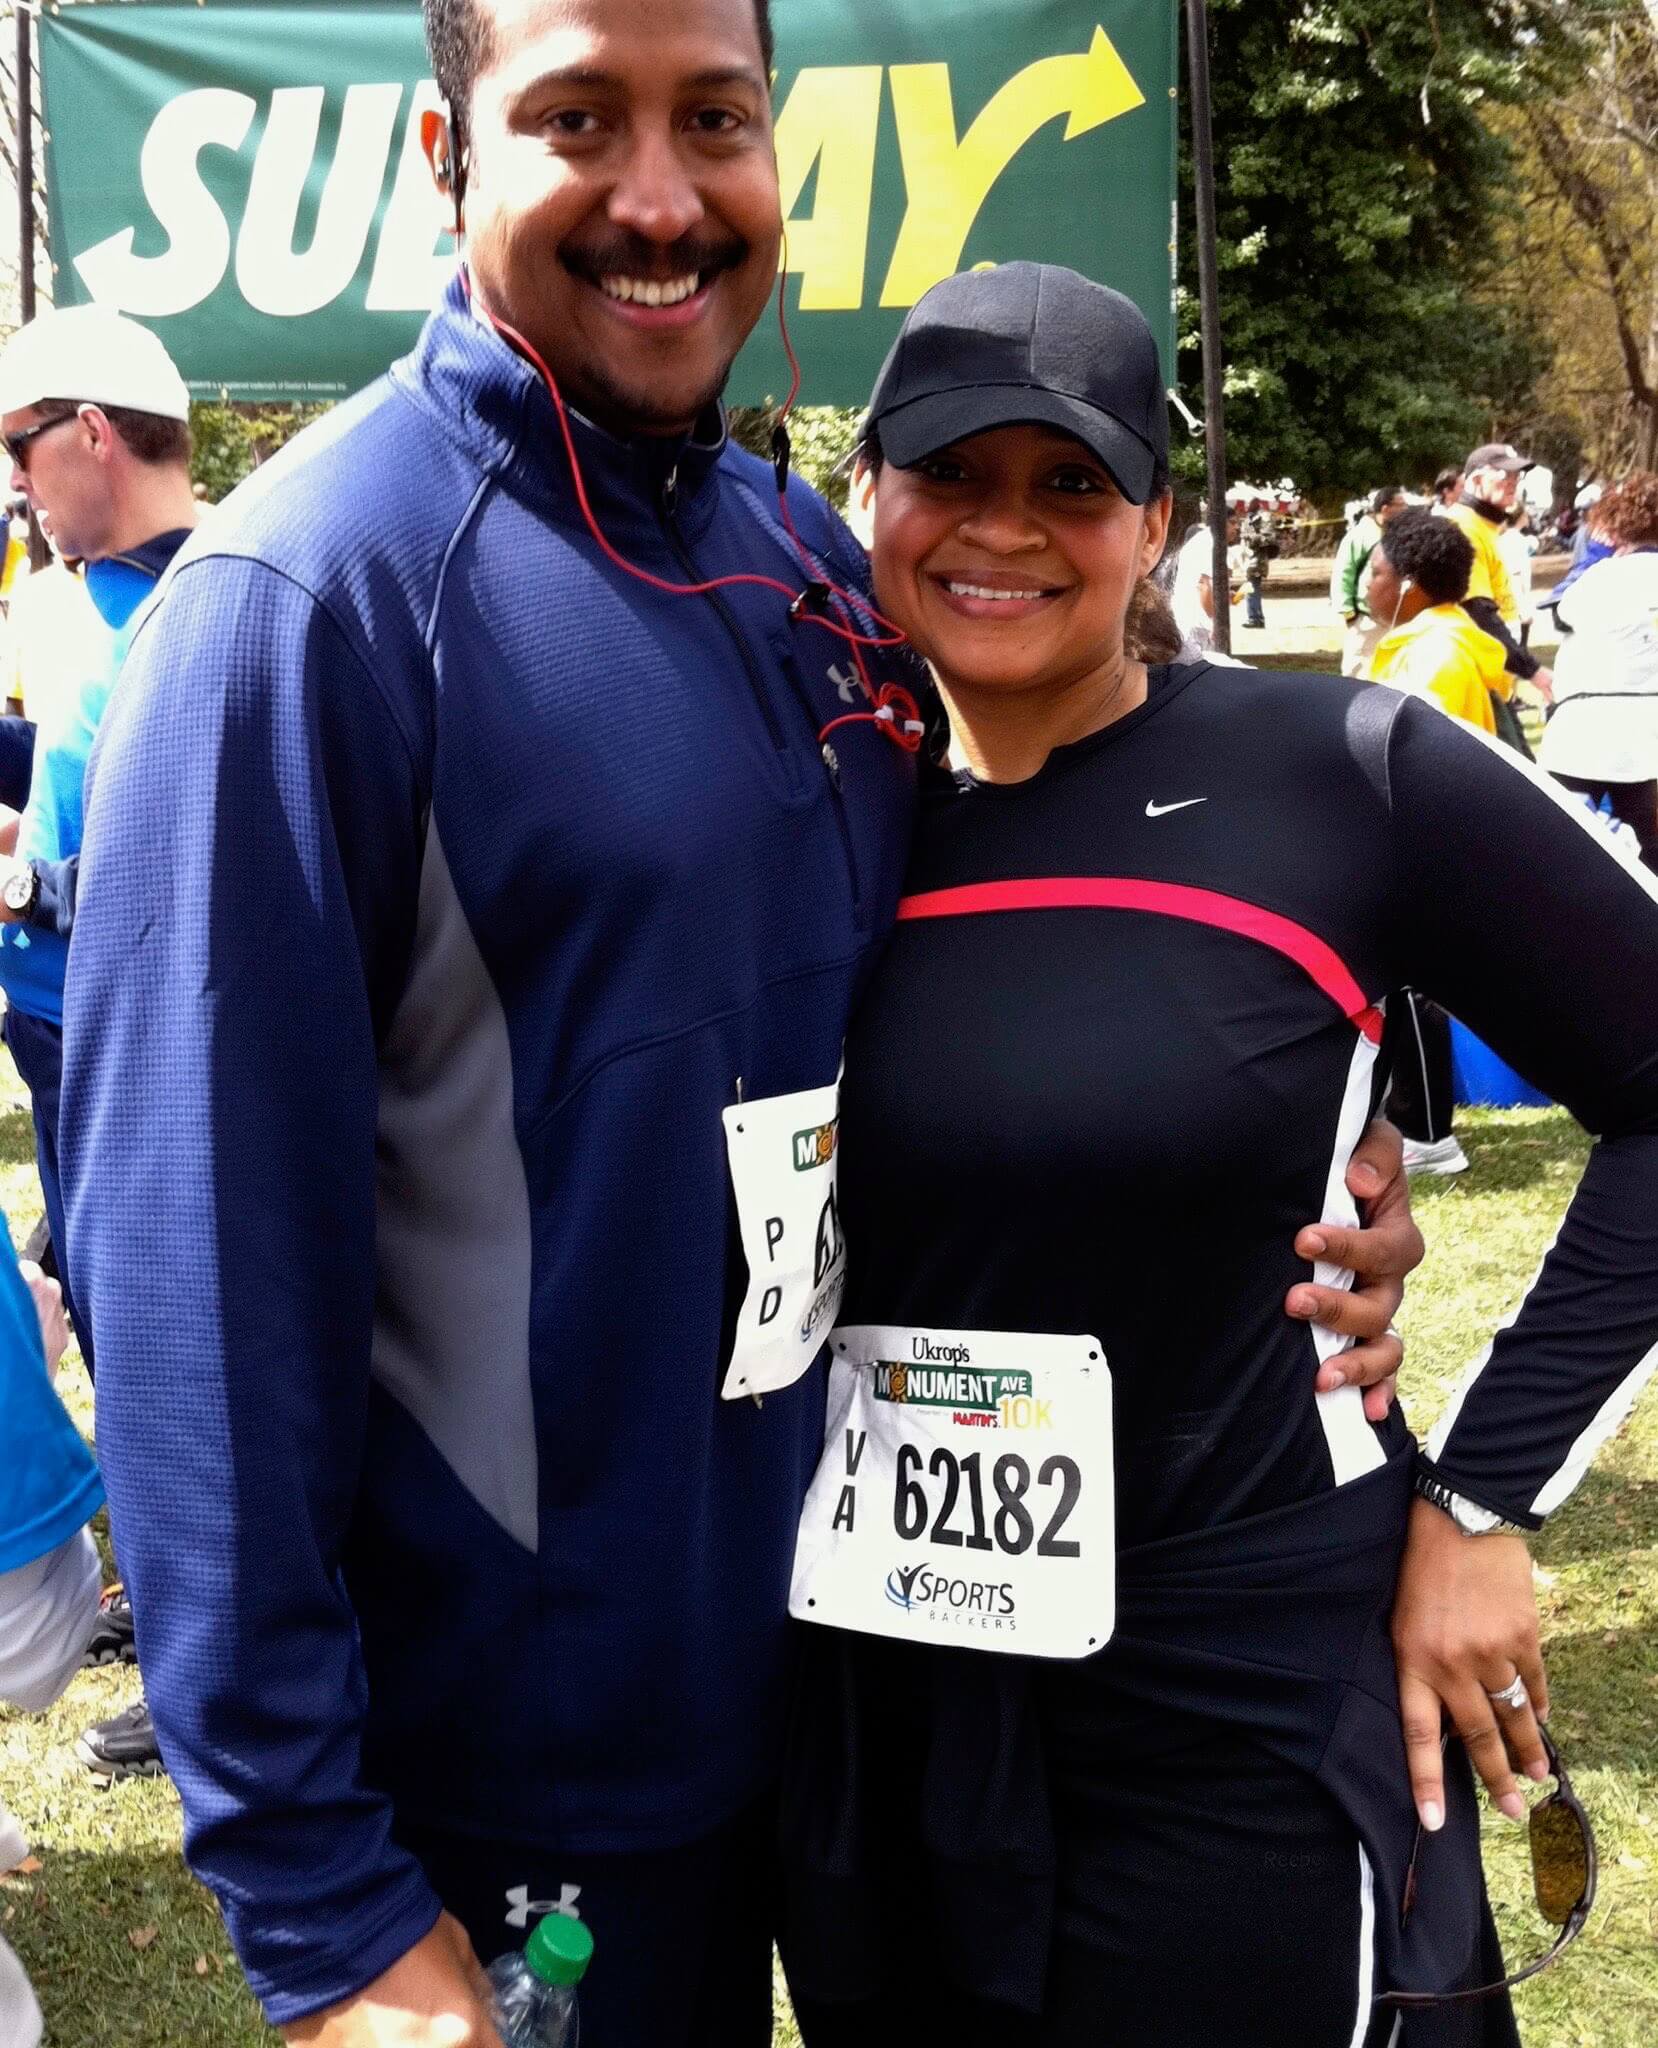 Dr. Latham-Solomon and her husband after completing a 10k